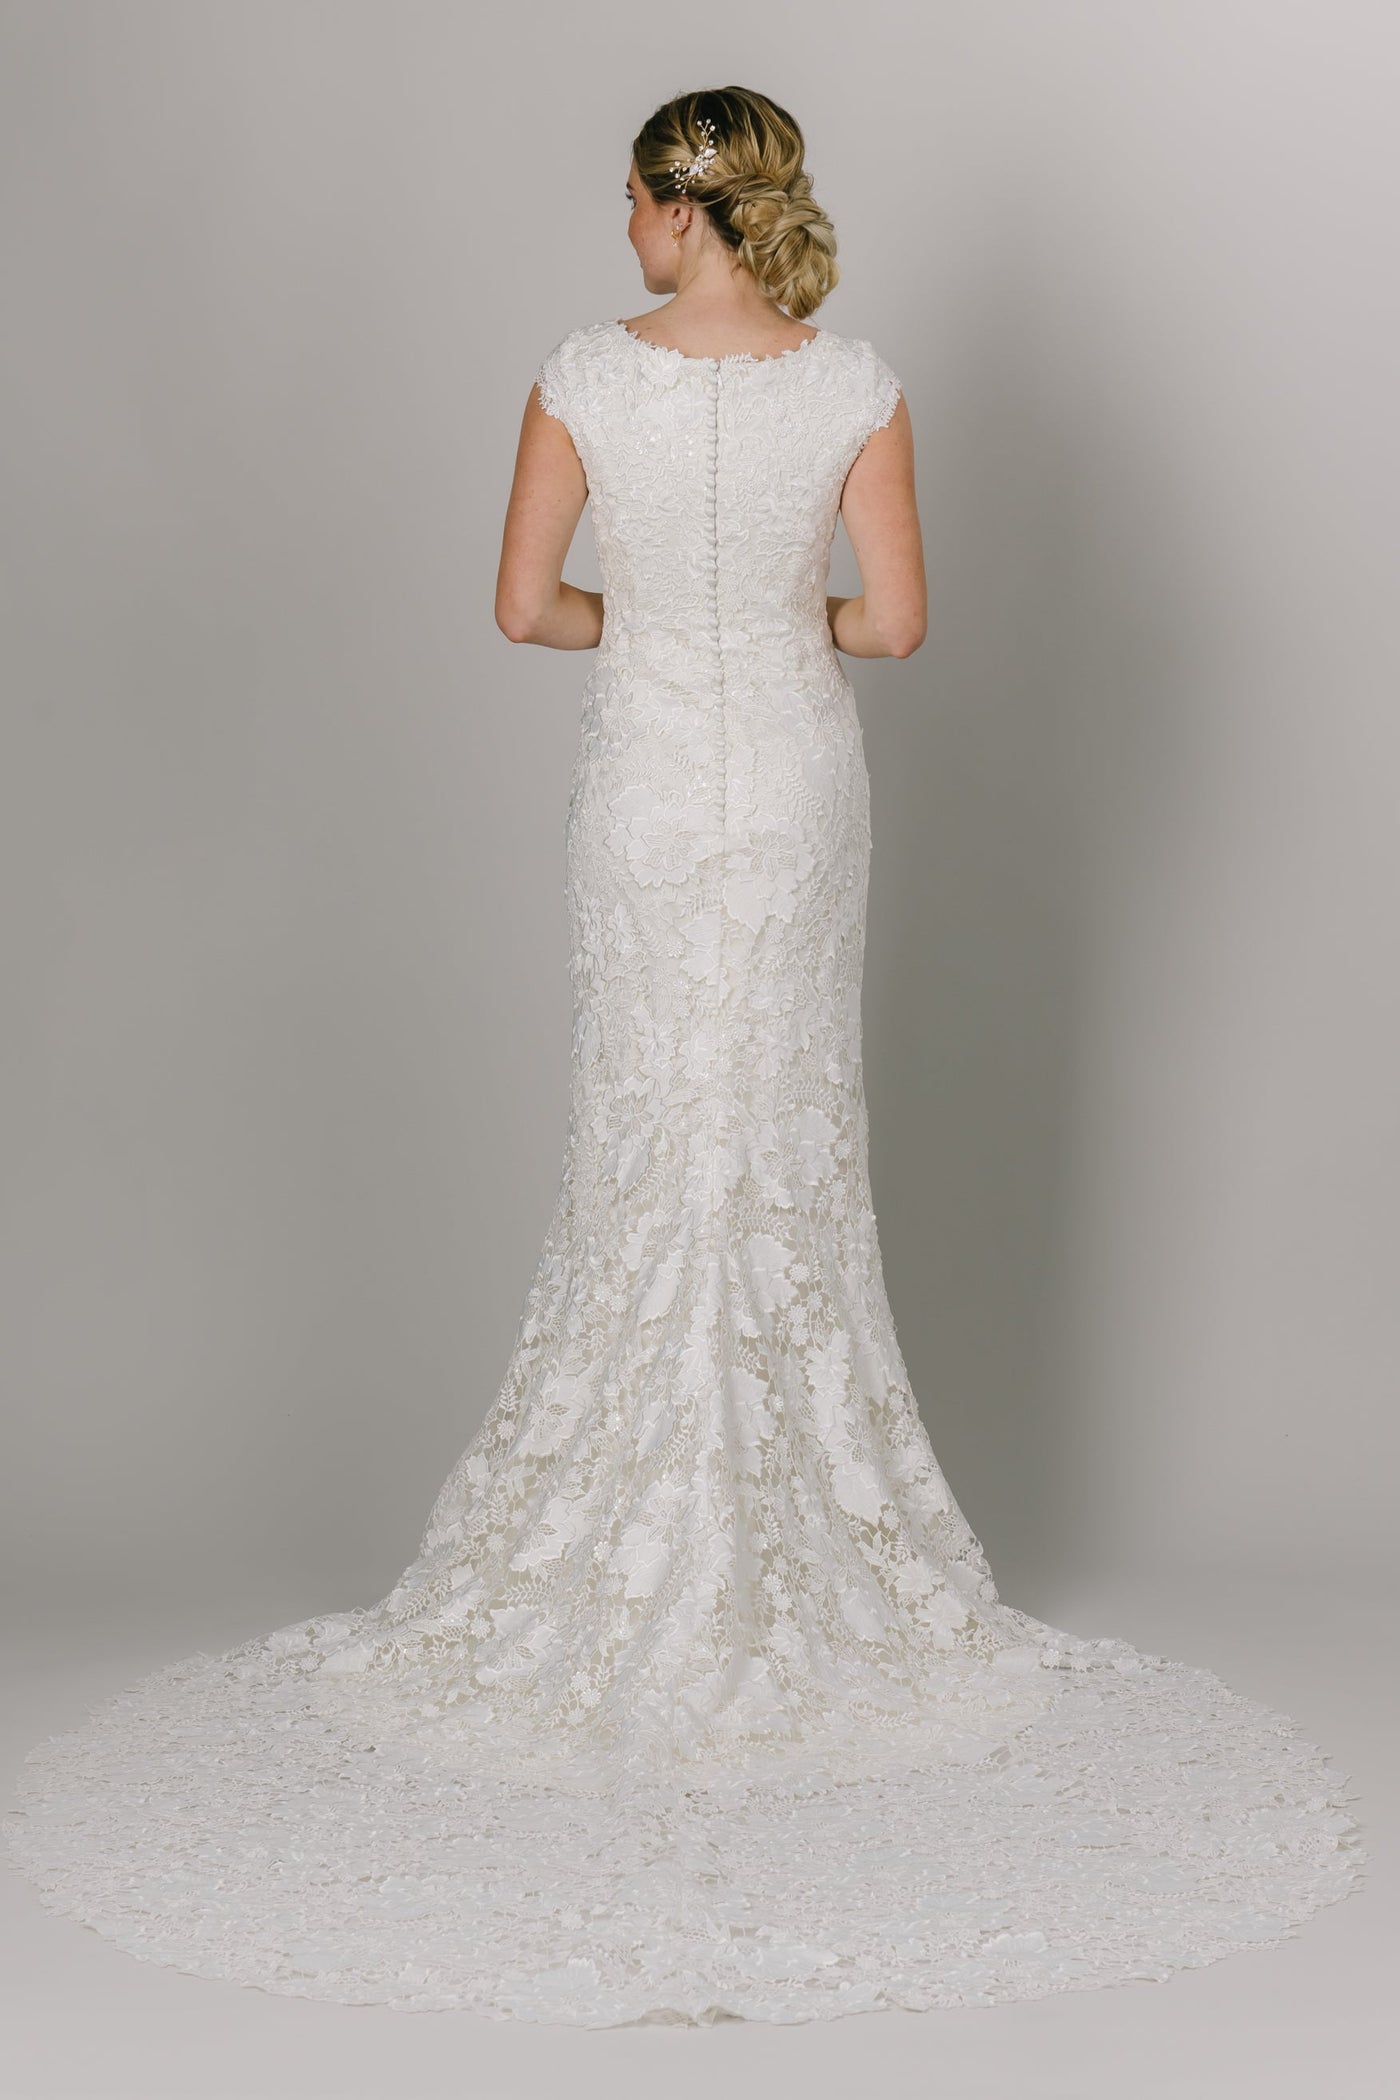 This Modest Wedding Dress features short sleeves, a round neck and an all over lace. - Modest Wedding Dresses - Modest Clothing - Modest Dresses - LatterDayBride